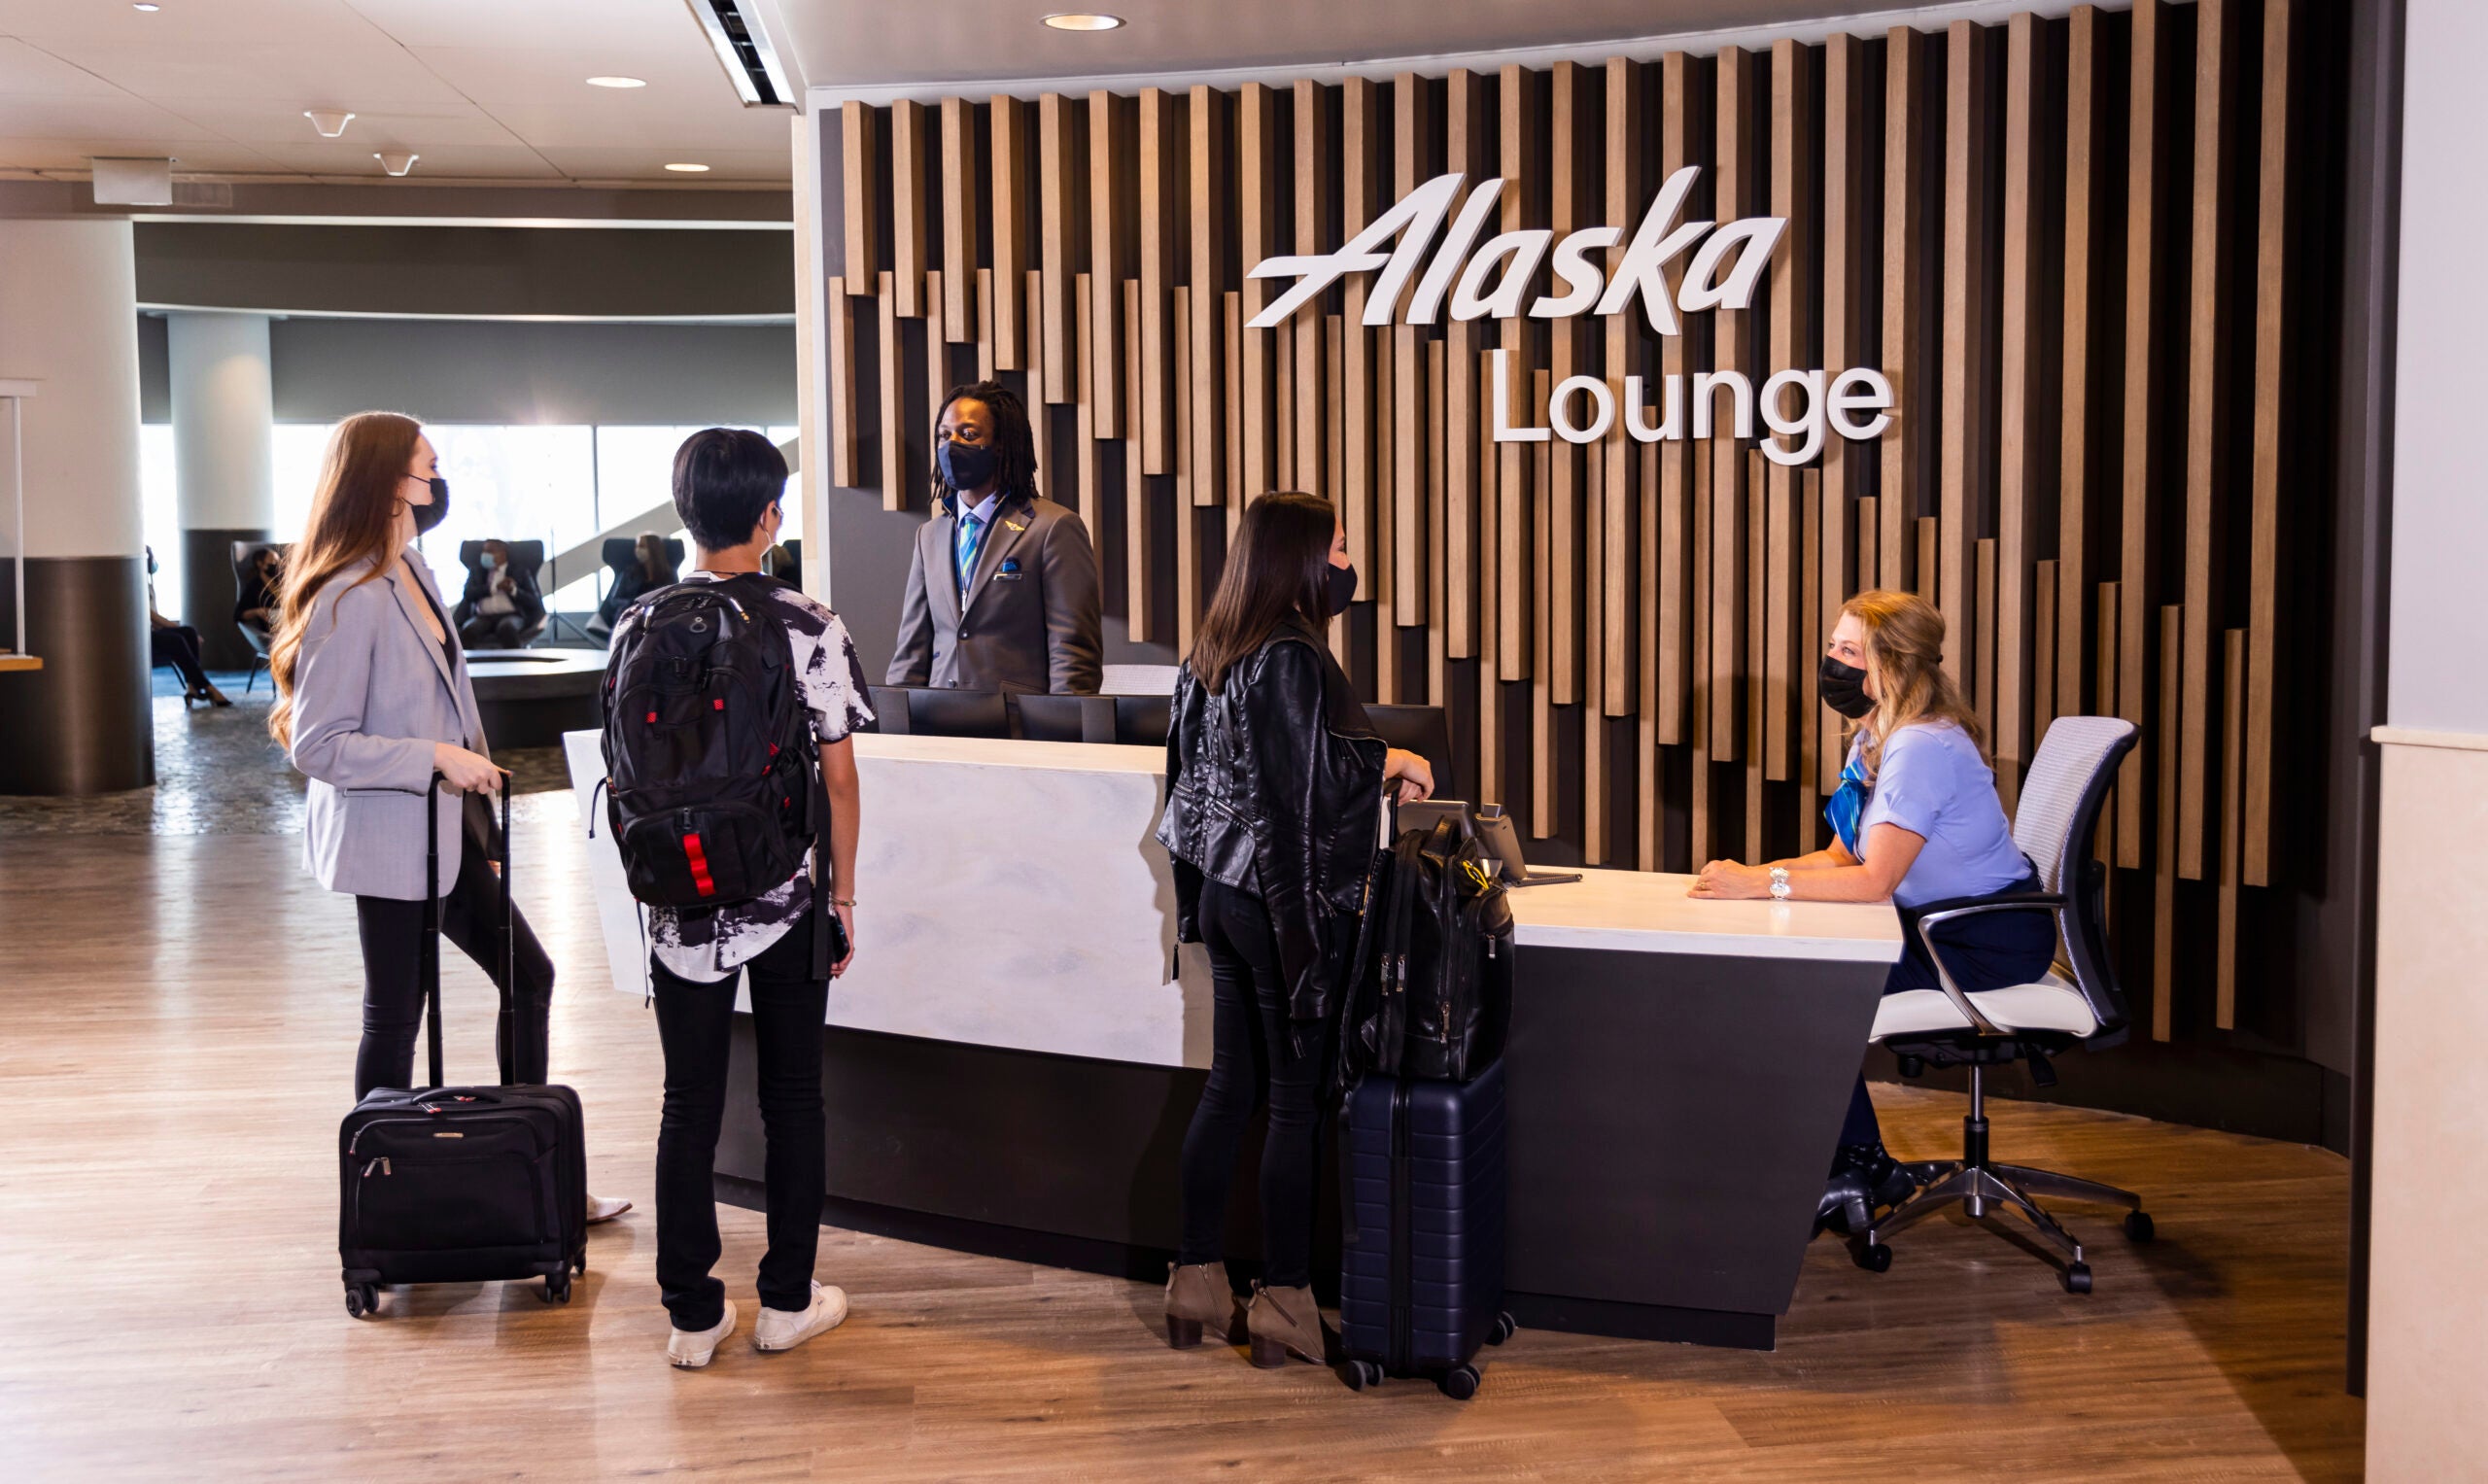 Alaska Airlines lounge guide: How to get access and more - The Points Guy